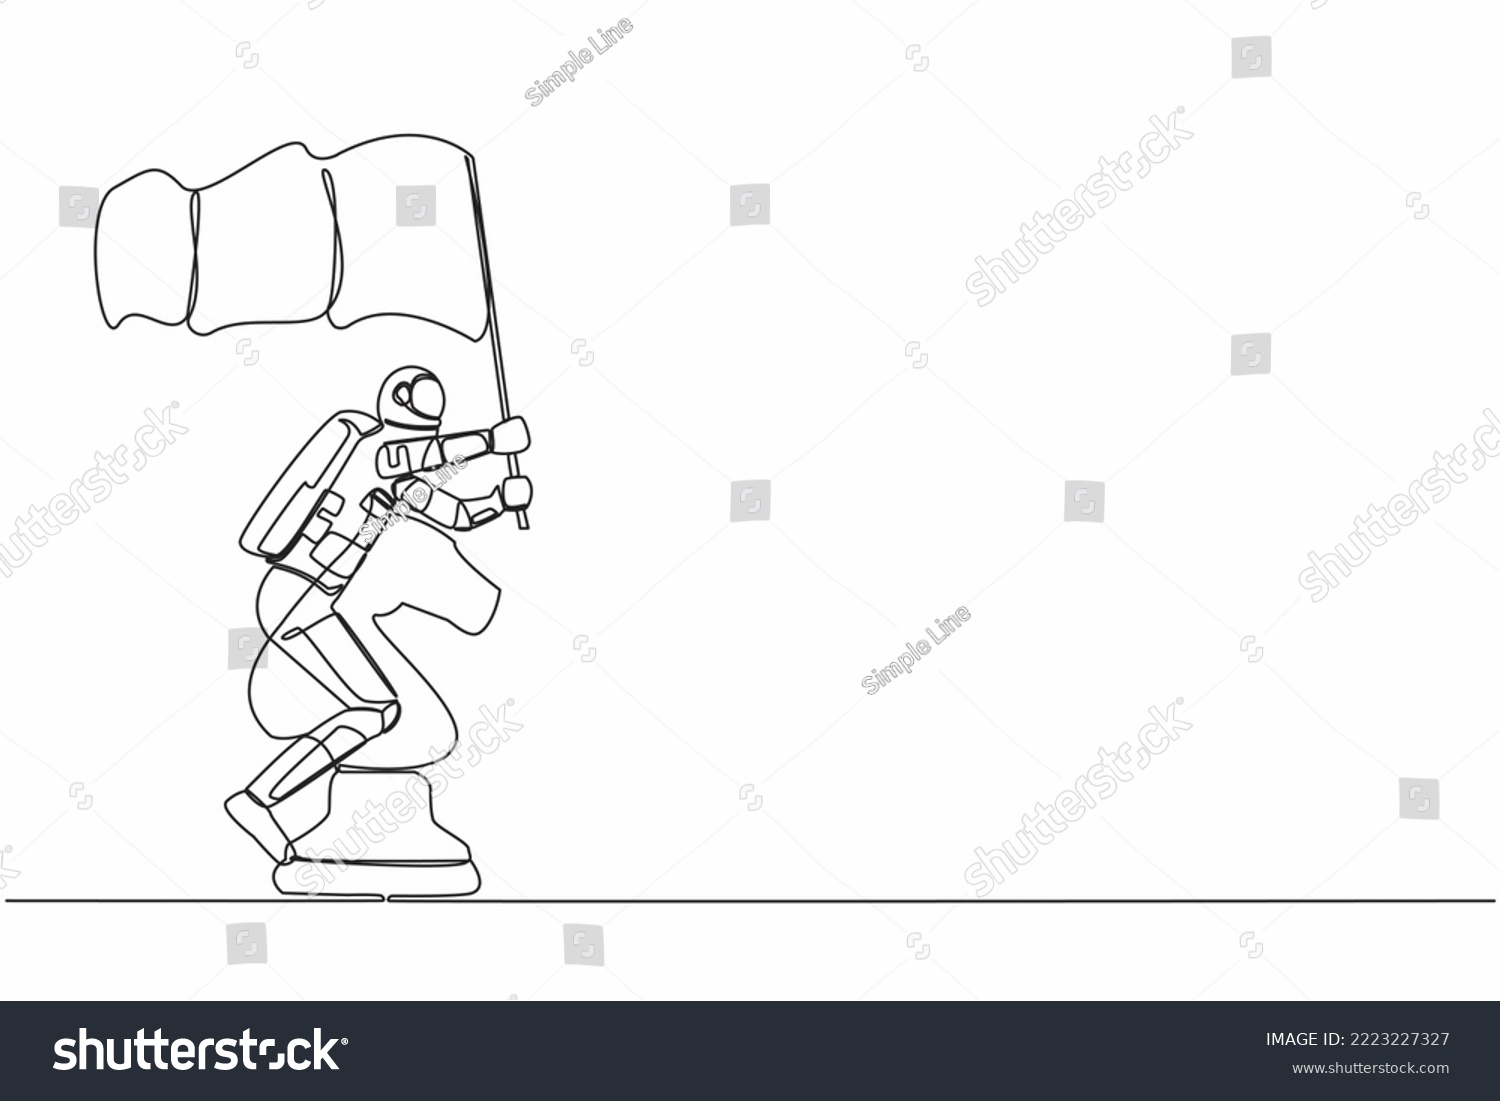 SVG of Single continuous line drawing young astronaut riding big chess horse knight piece and holding flag. Battle in space war interstellar. Cosmonaut deep space. One line graphic design vector illustration svg